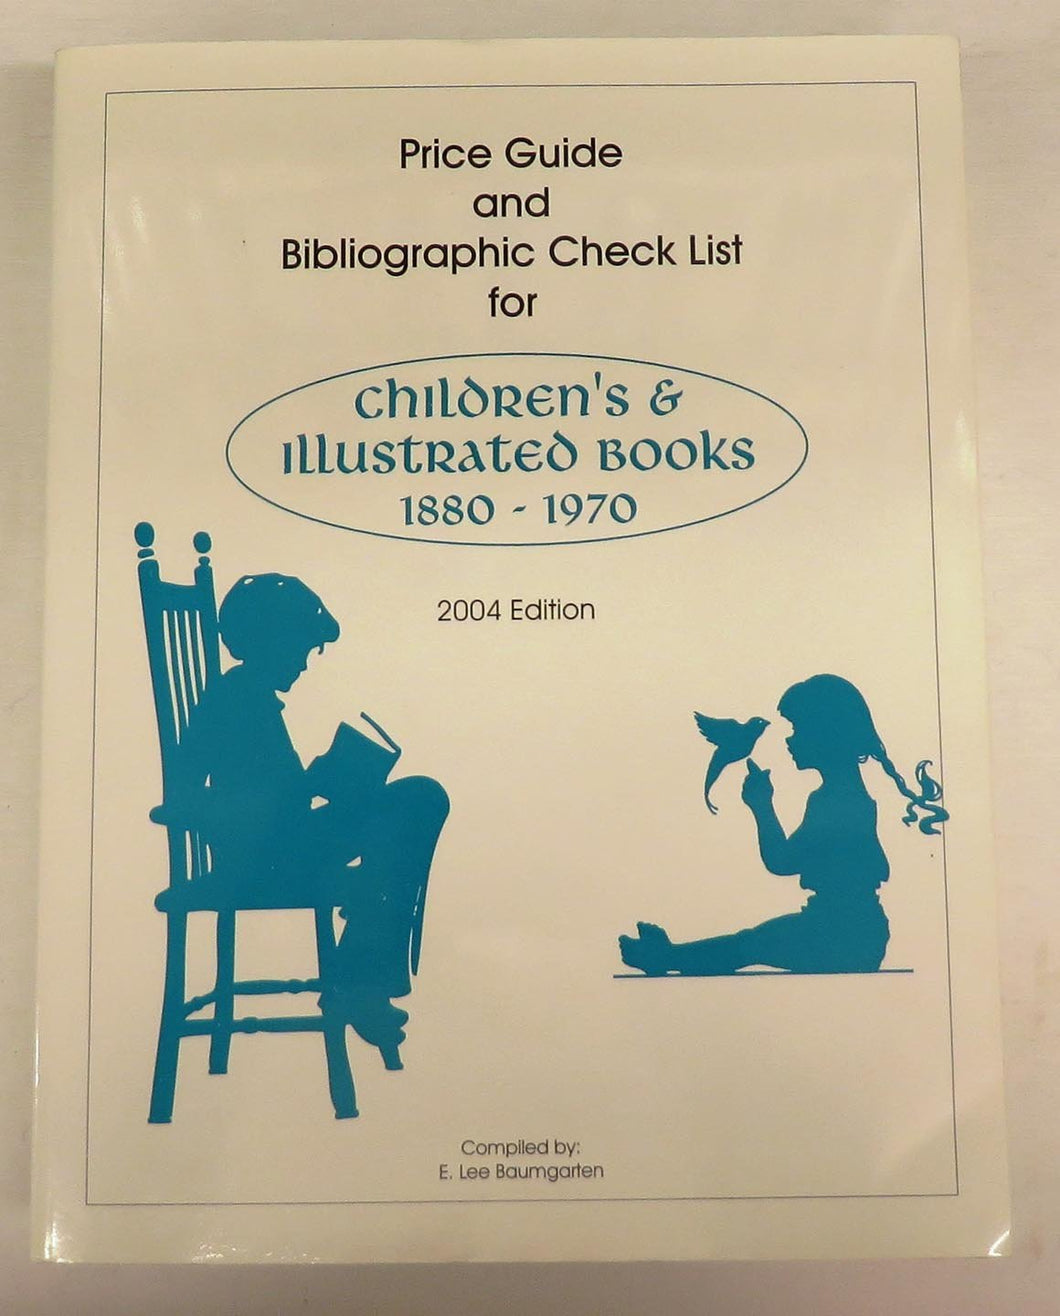 Price Guide and Bibliographic Checklist for Children's & Illustrated Books for the years 1880 - 1970